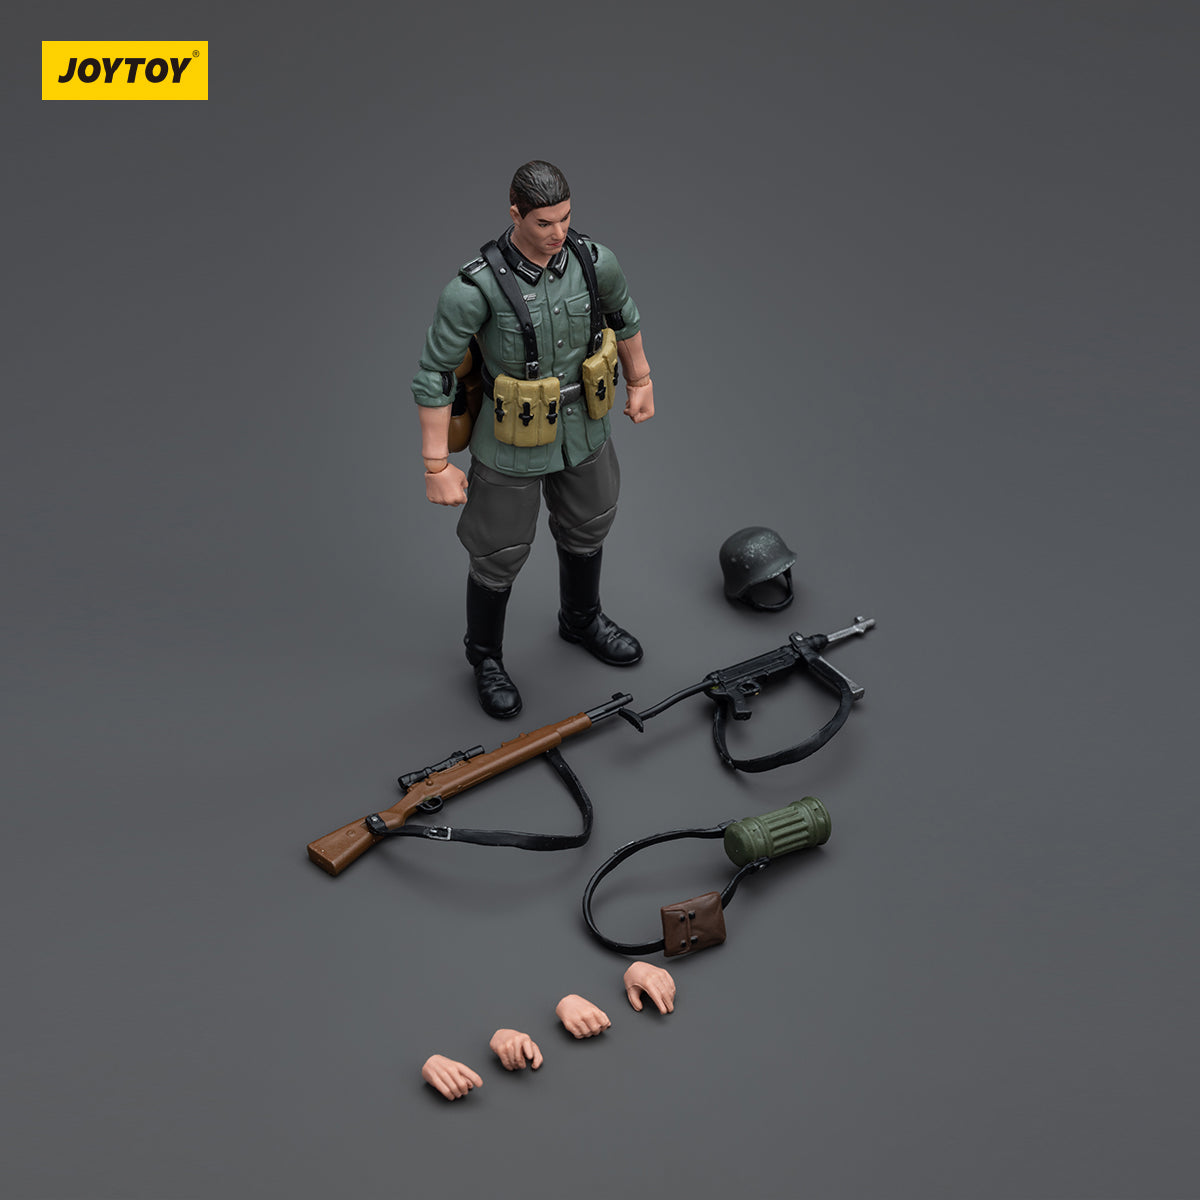 WWII: Military Figures: Wehrmacht